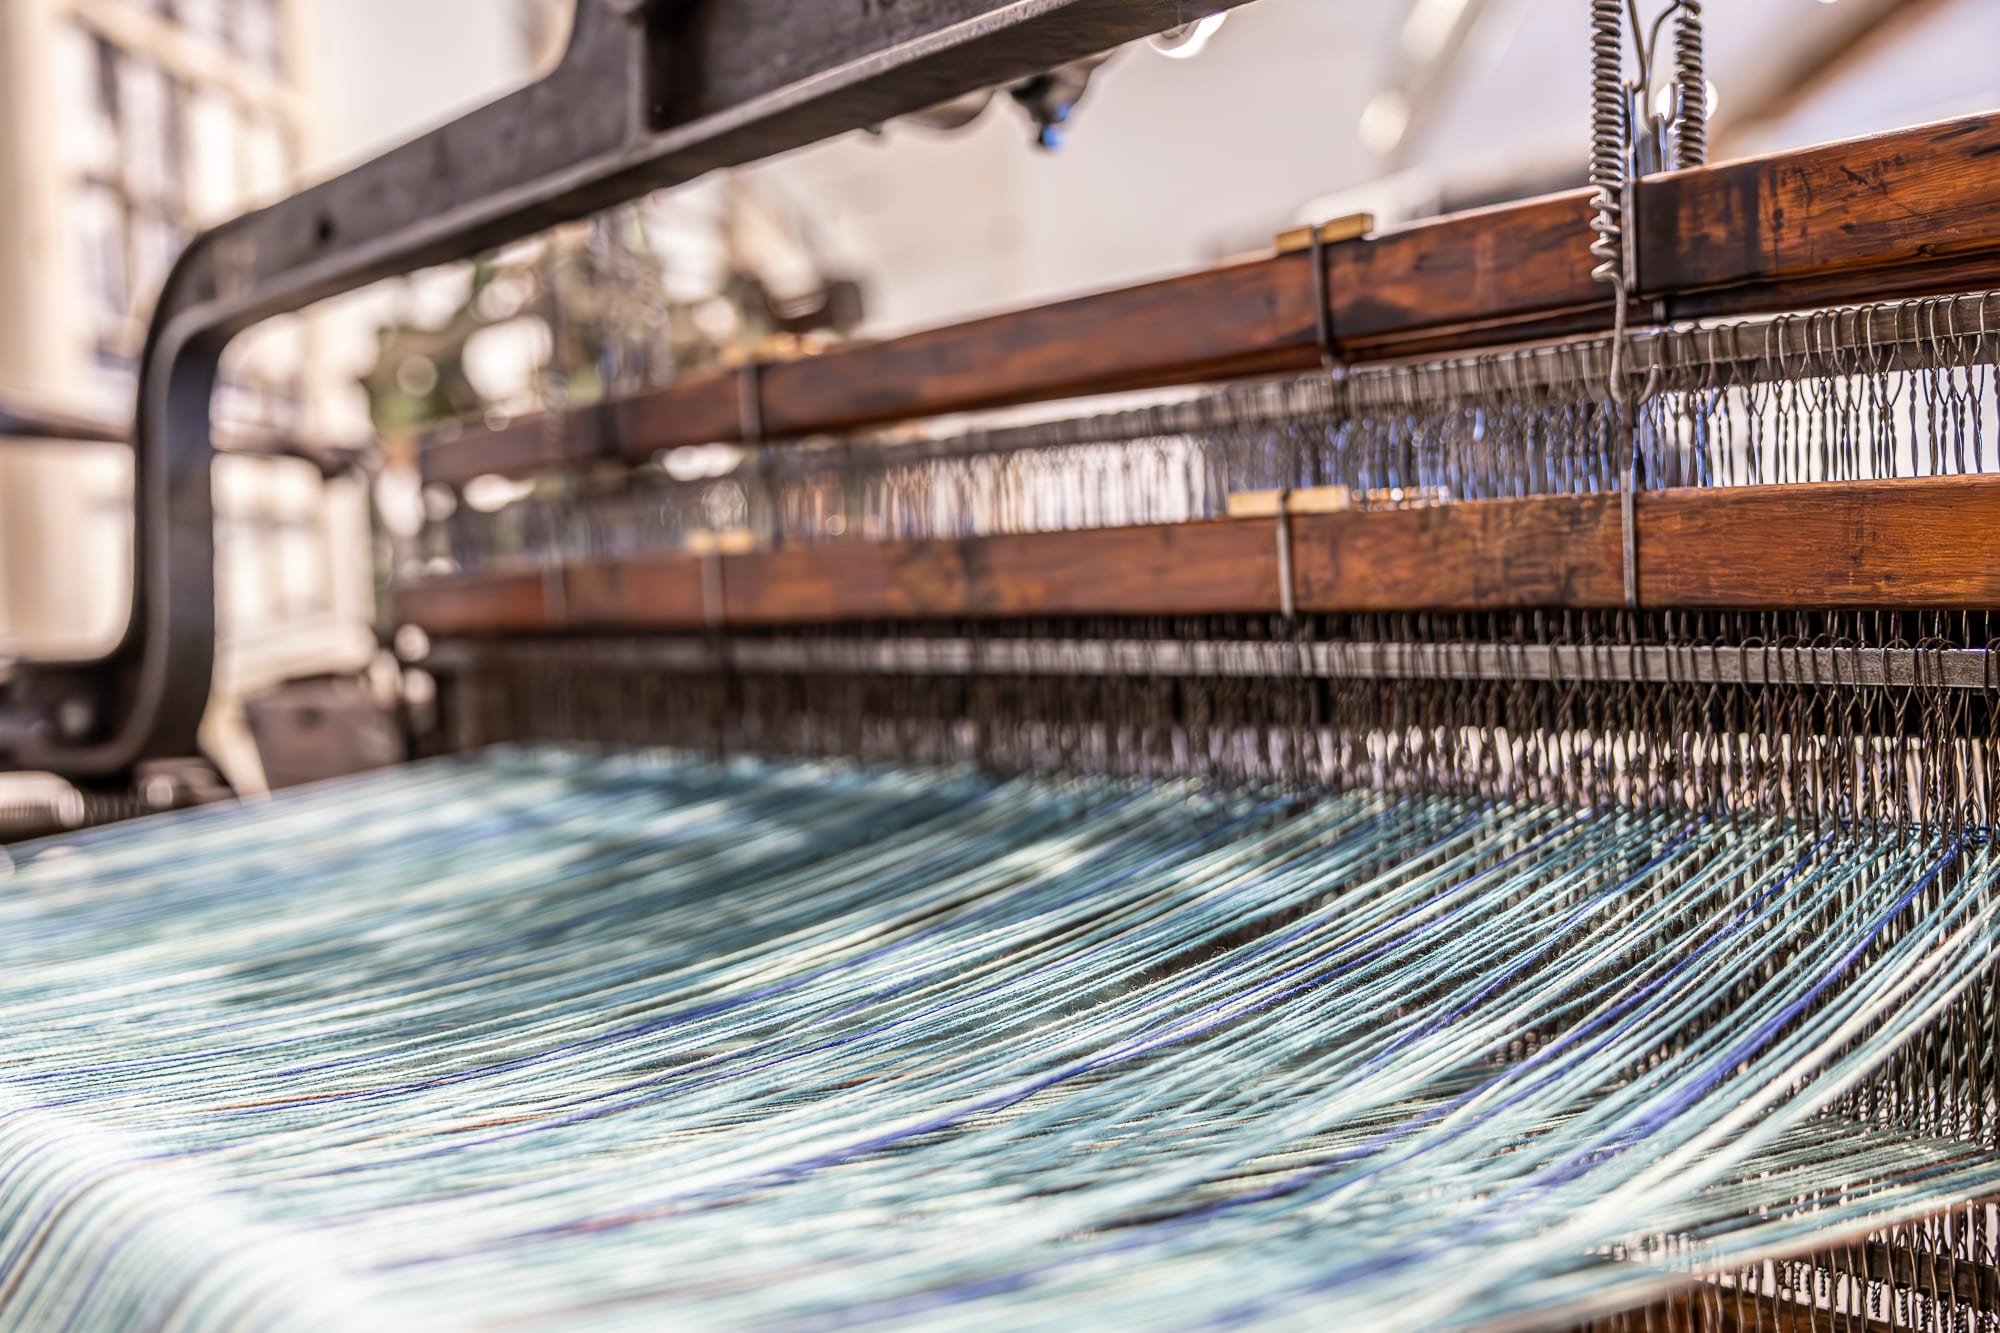 Photo of an old loom in action with a wide expanse of threads in pale blues and greens